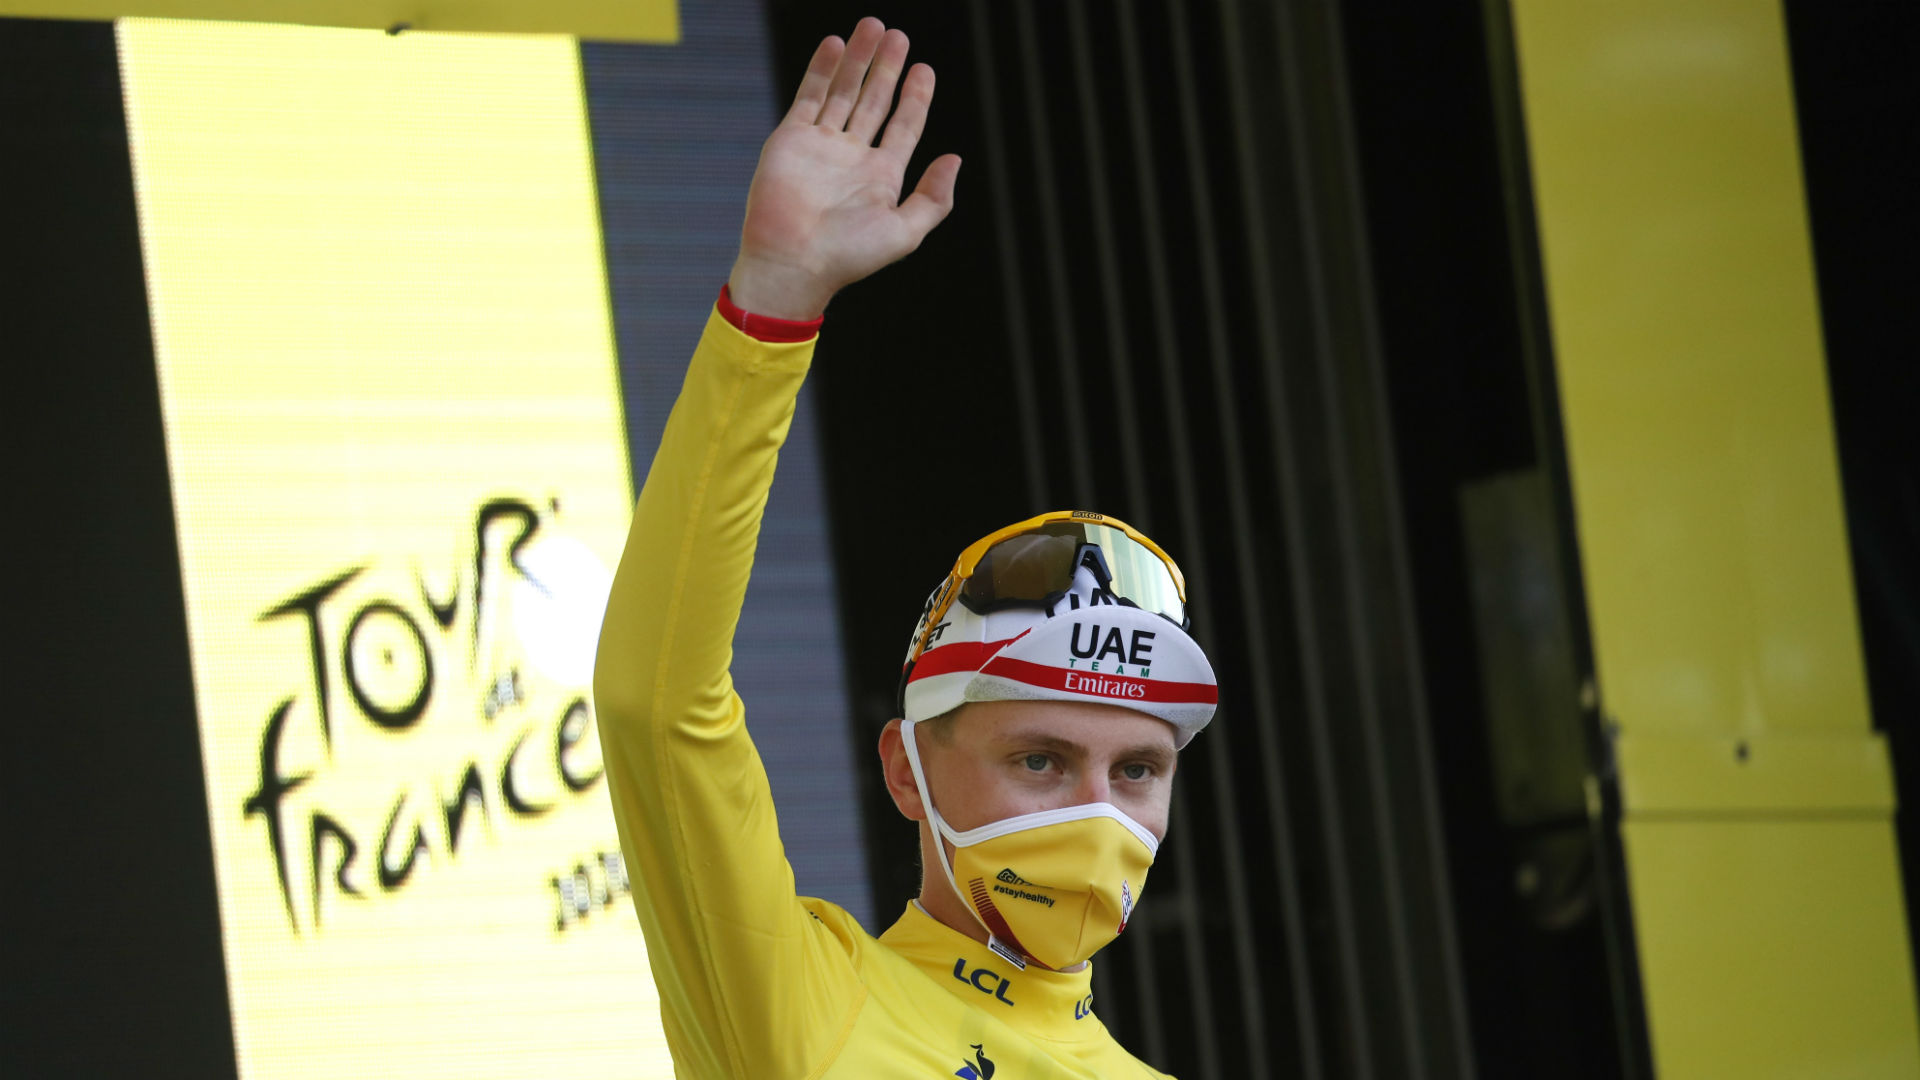 Primoz Roglic was unable to match Tadej Pogacar, who produced an incredible comeback to effectively win the Tour de France.